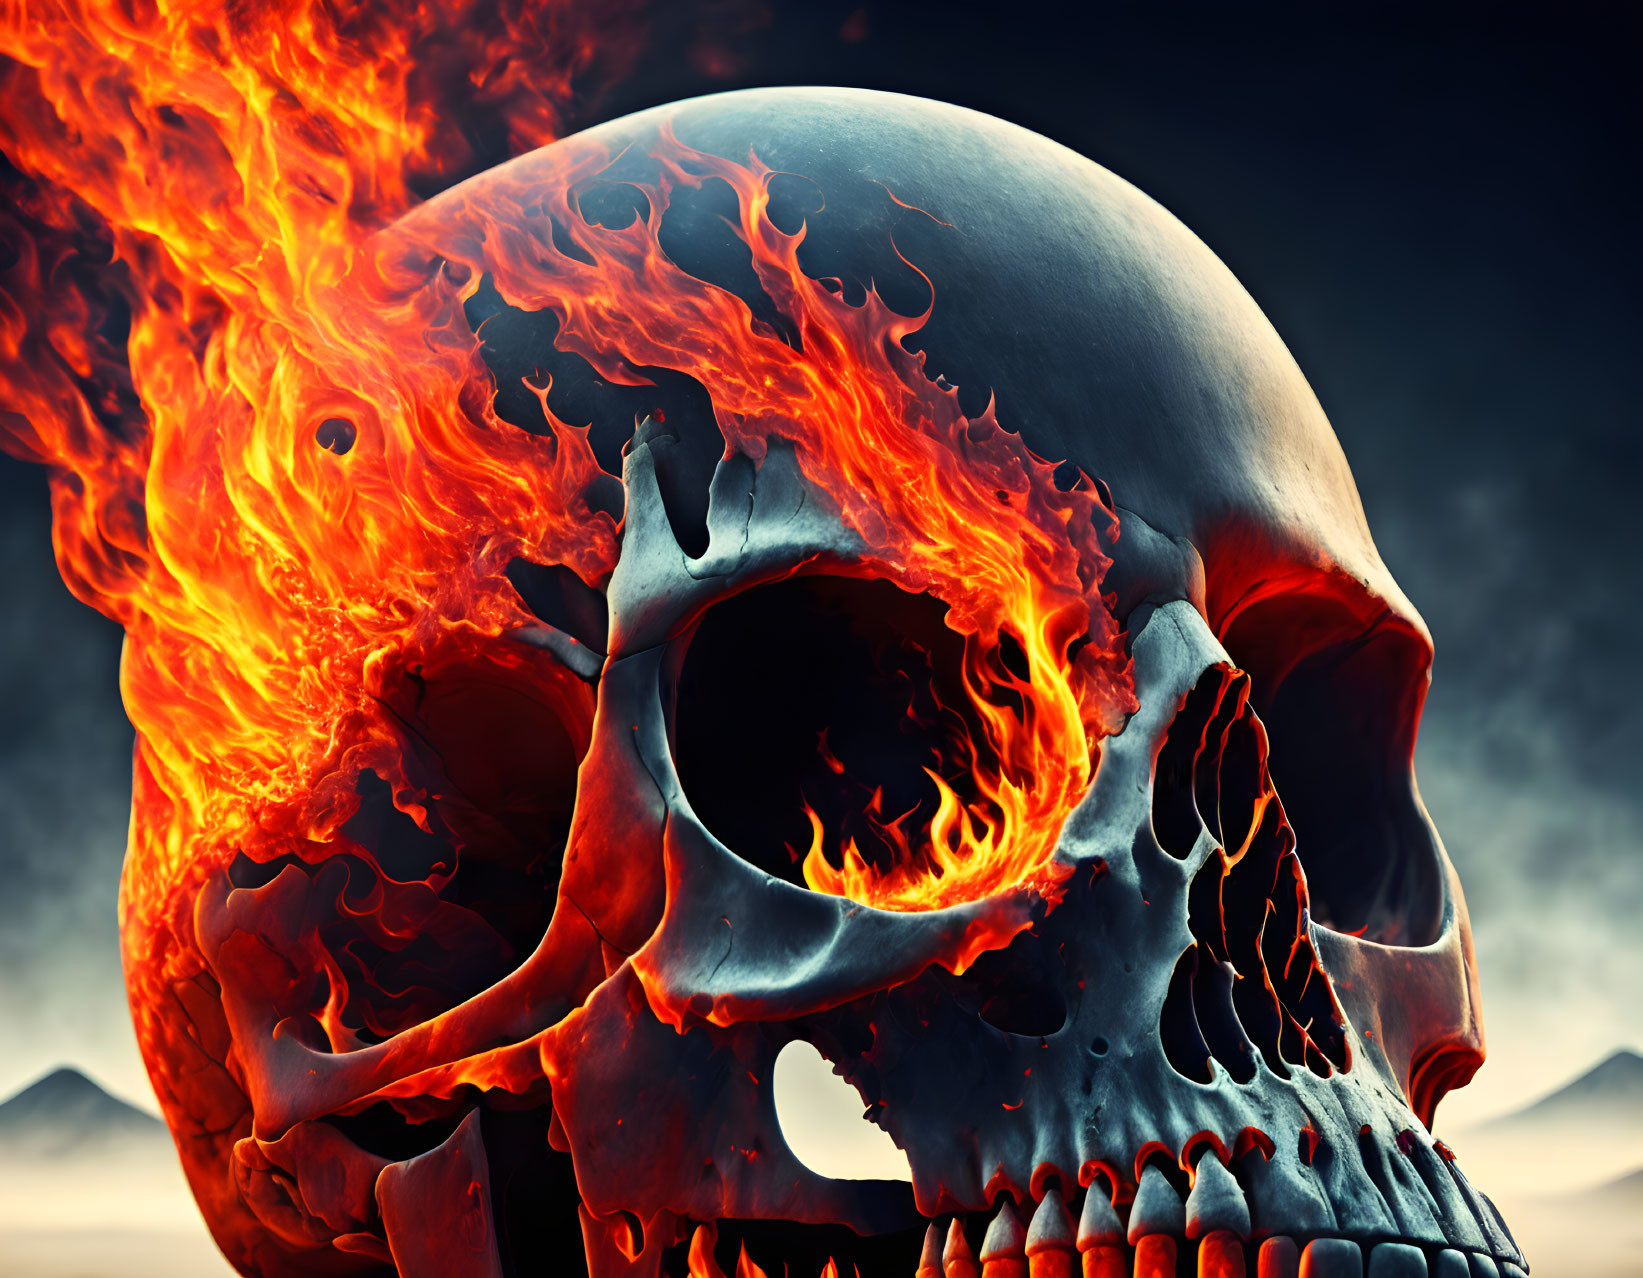 Flaming human skull against stormy sky and mountains